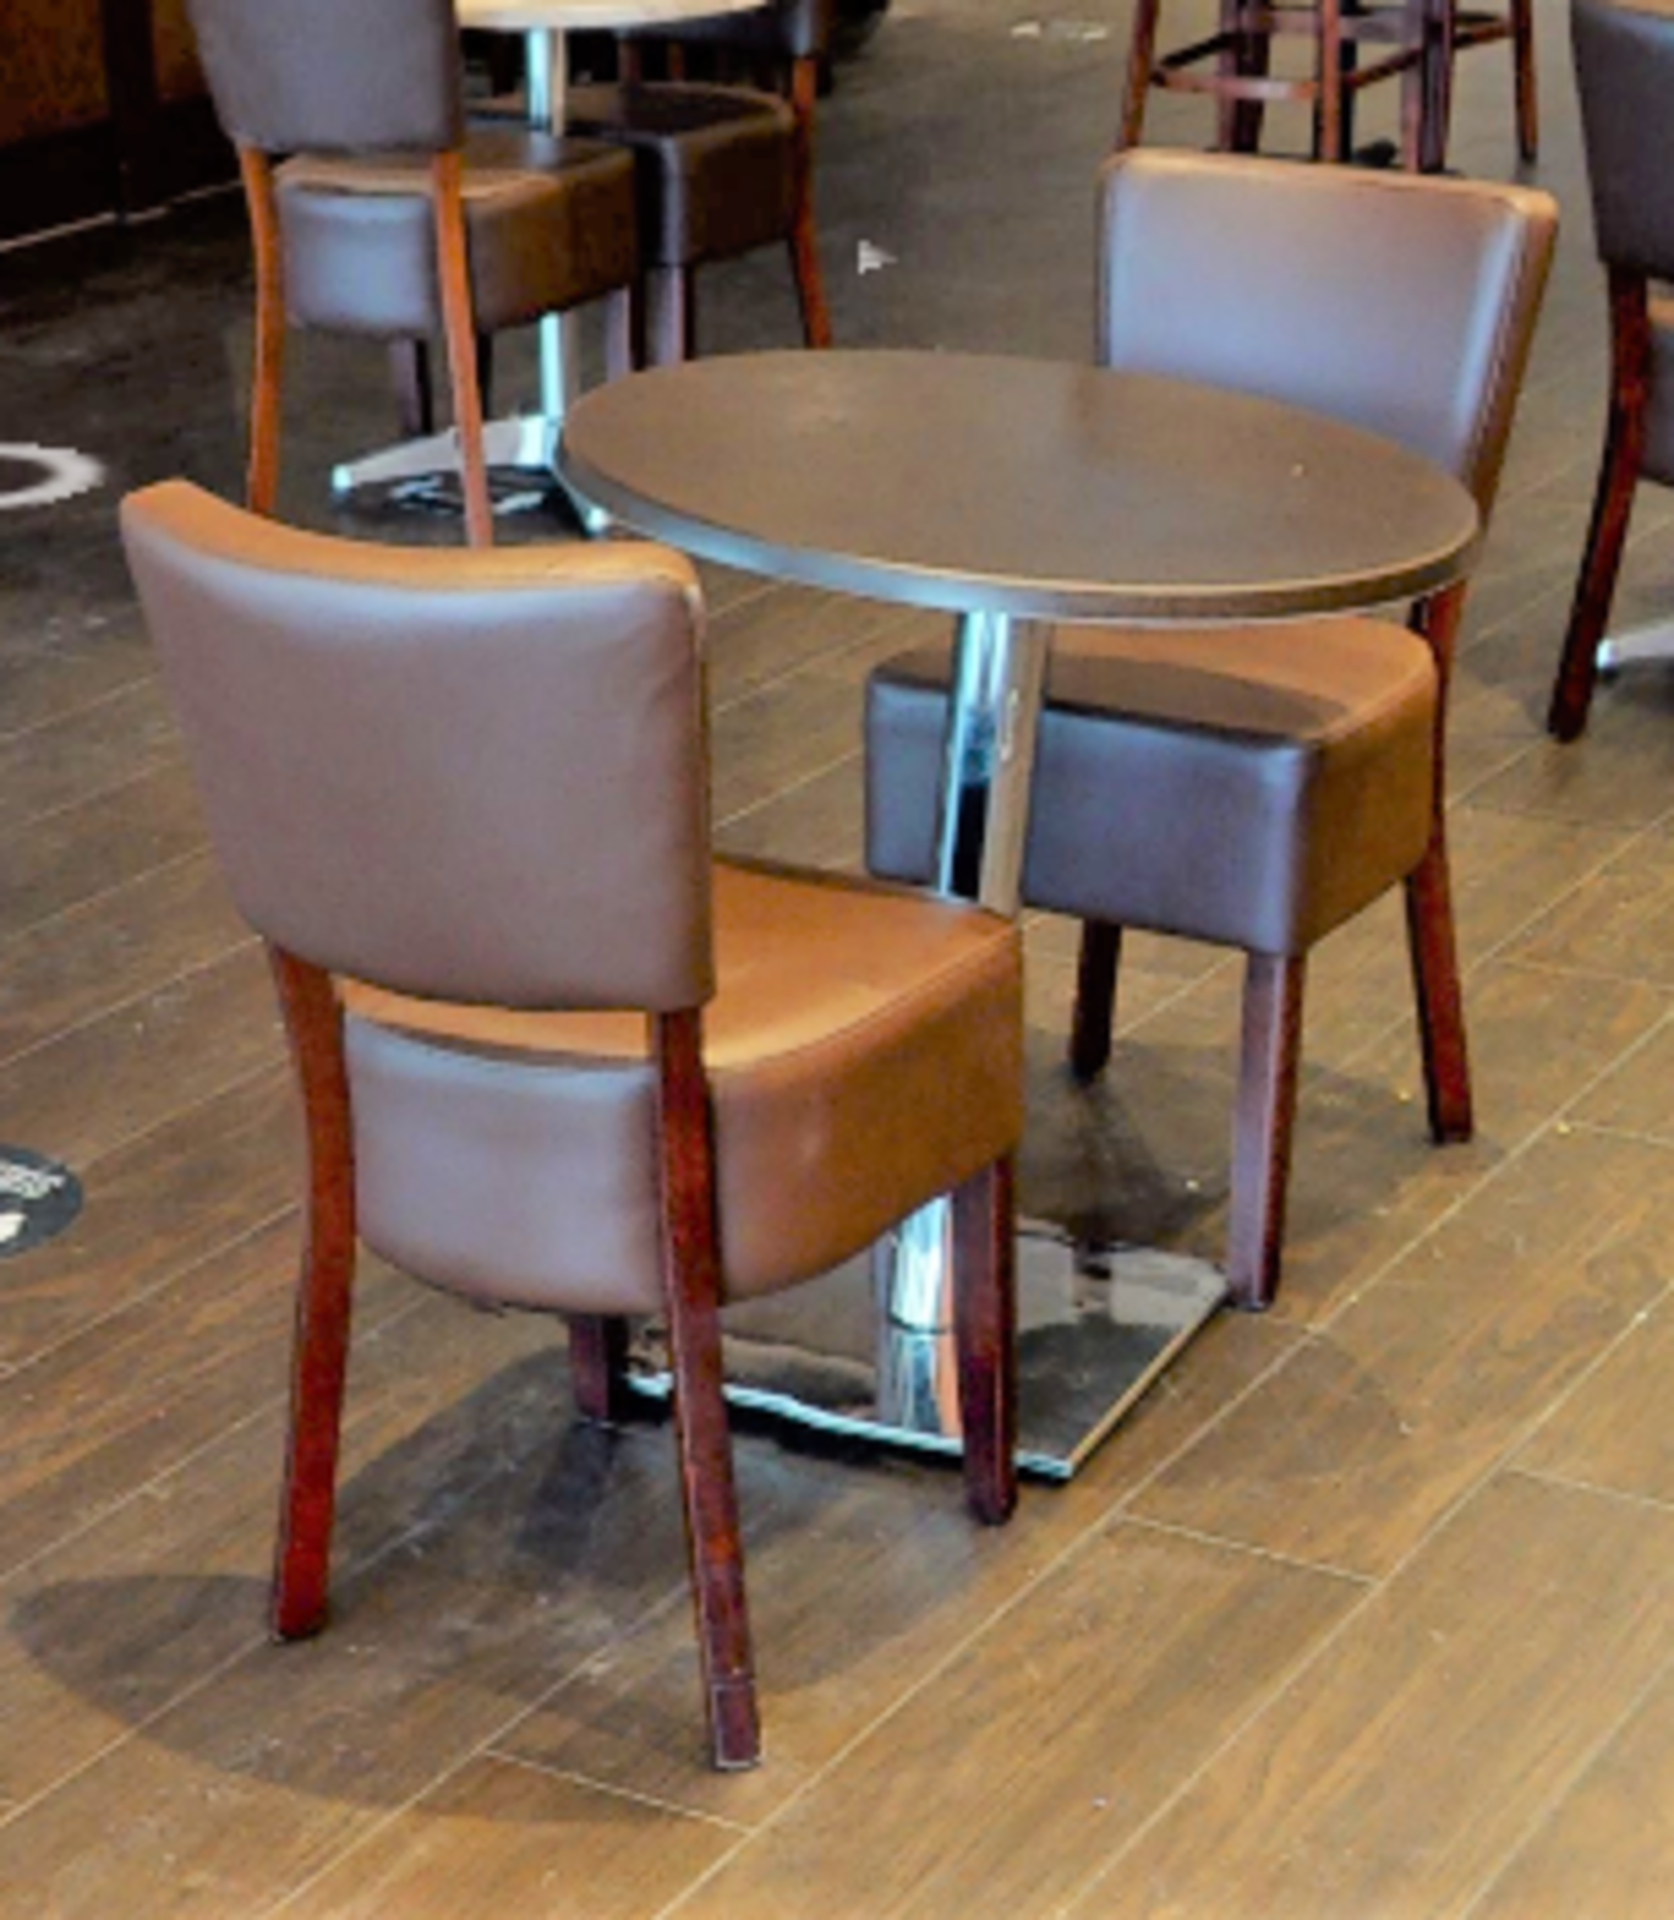 8 x Restaurant Chairs With Brown Leather Seat Pads and Padded Backrests - CL701 - Location: Ashton - Image 3 of 9